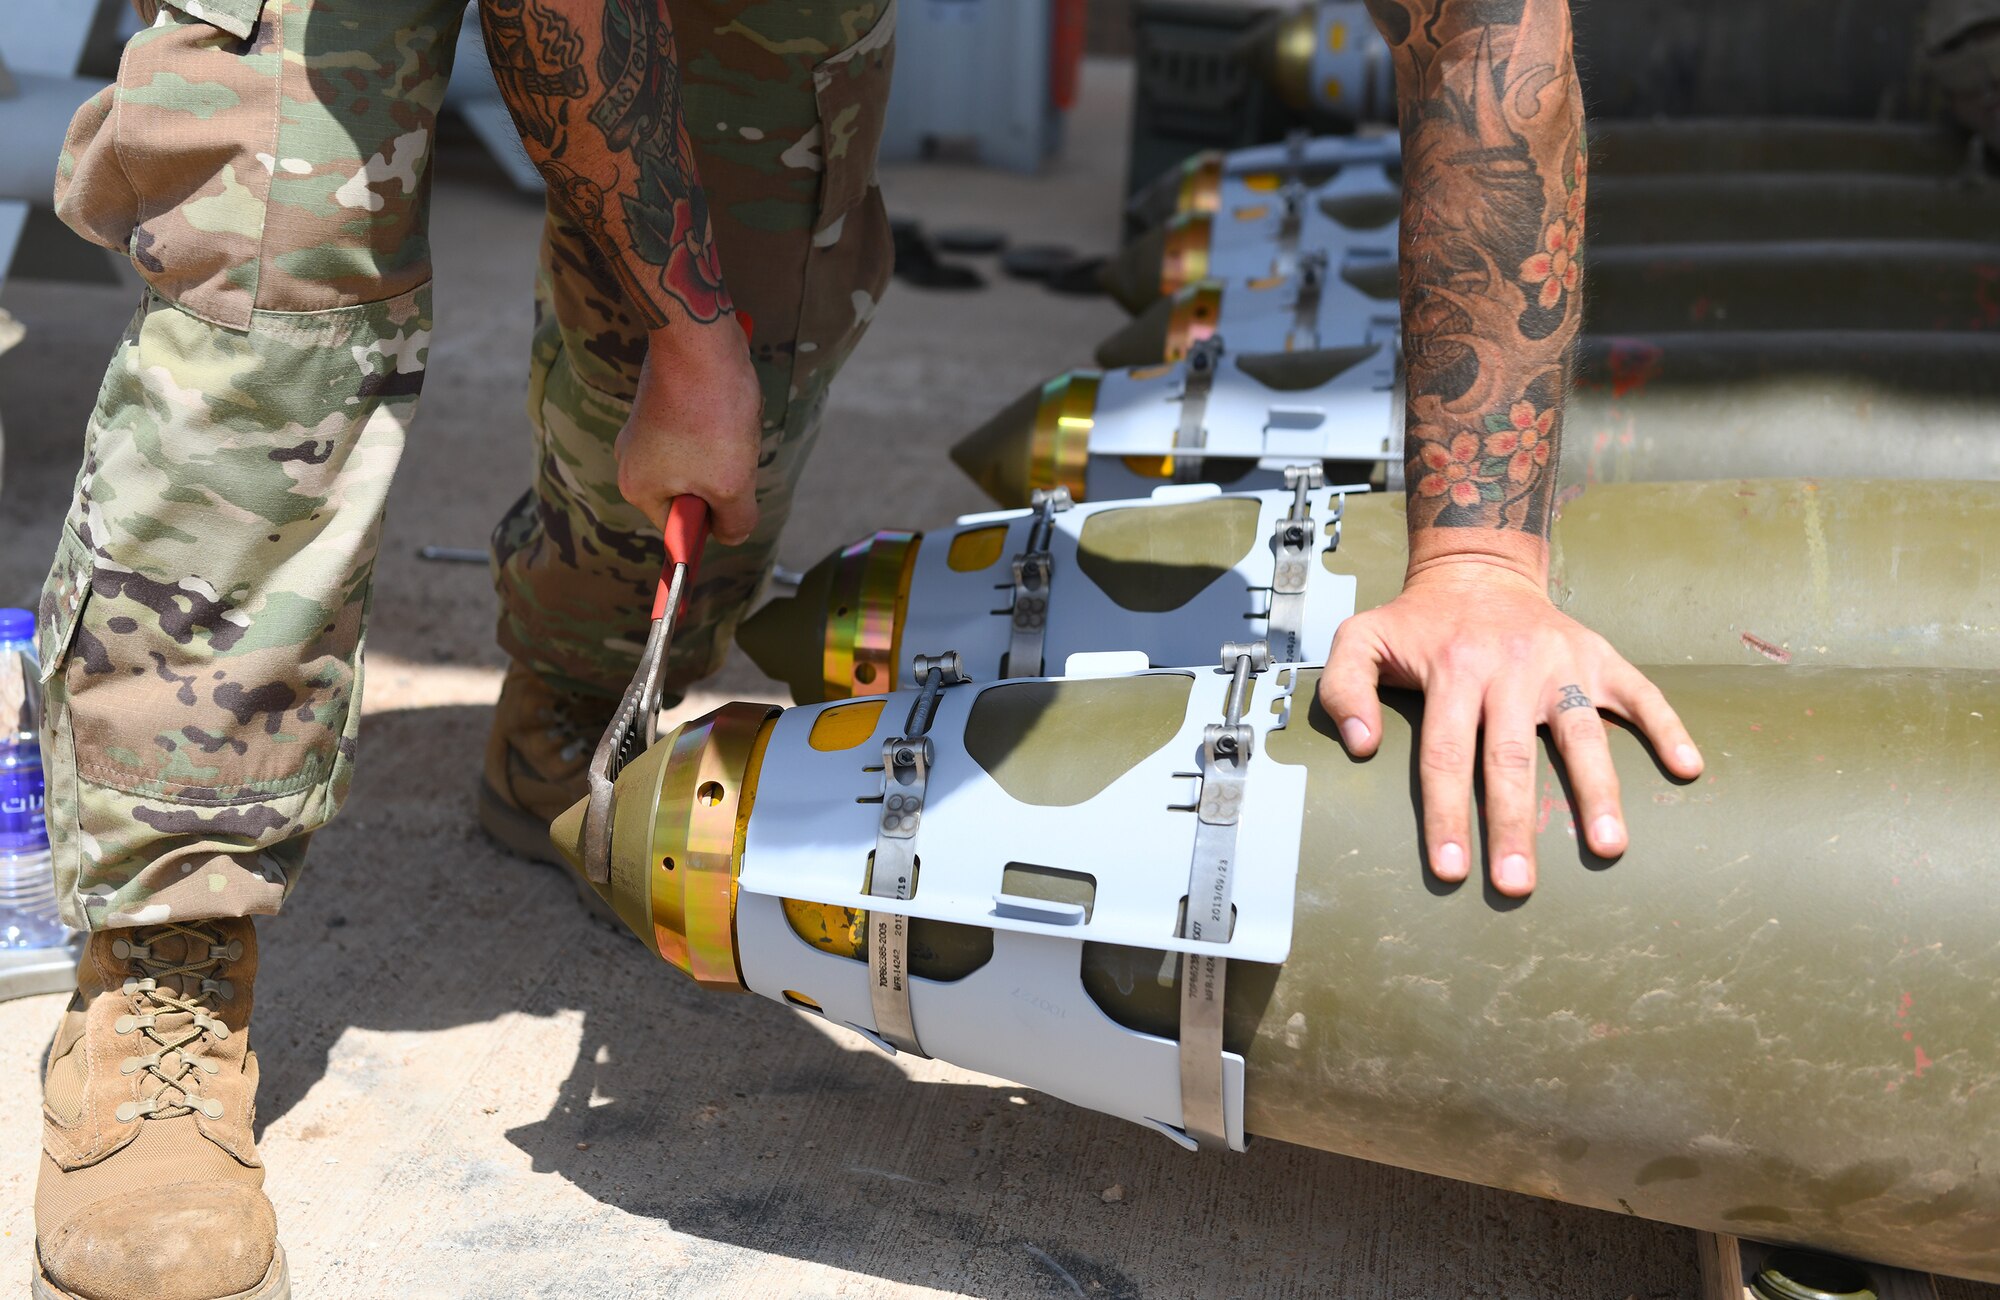 U.S. Air Force Tech. Sgt. Brandon Coleman, 726th Expeditionary Air Base Squadron senior munitions inspector, assembles the nose of munitions during a bomb build at Chabelley Airfield, Djibouti, Nov. 12, 2019. The 726th EABS Munitions Systems Airmen build, inspect and store all munitions at the airfield, ensuring mission effectiveness at a moment’s notice. (U.S. Air Force photo by Staff Sgt. Alex Fox Echols III)